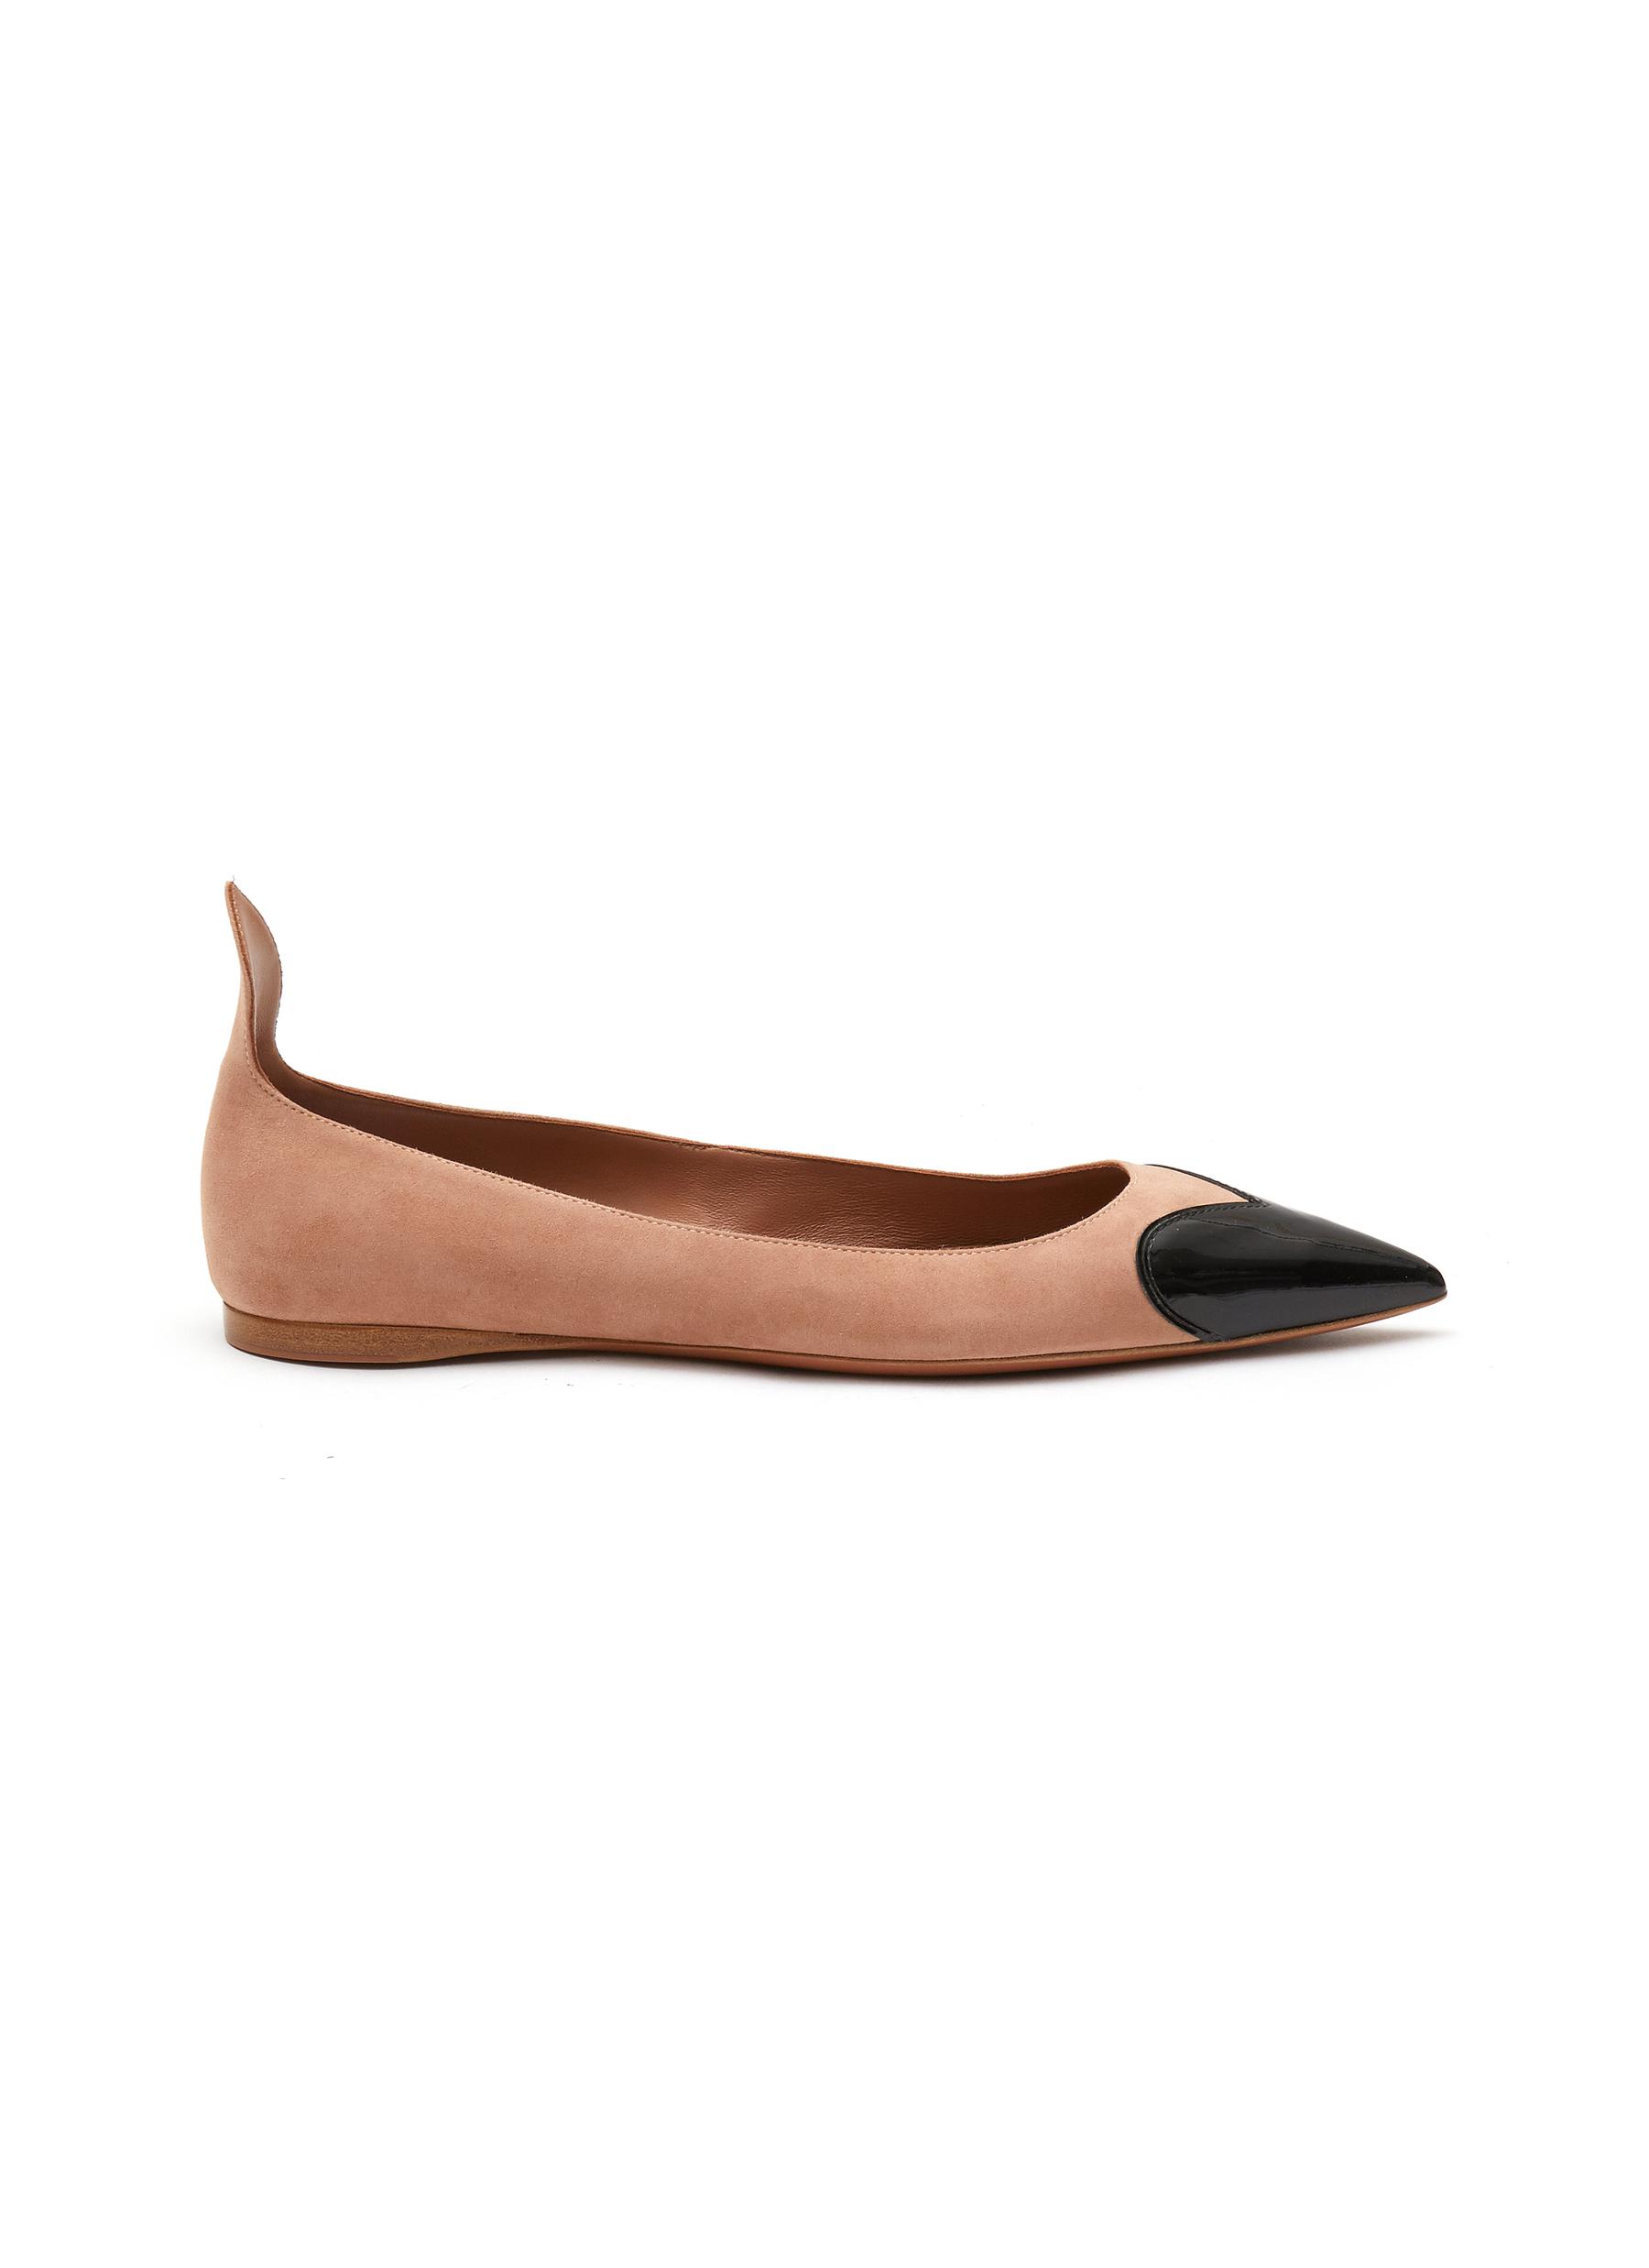 'COEUR' POINT TOE PATENT LEATHER SUEDE BALLERINA FLATS